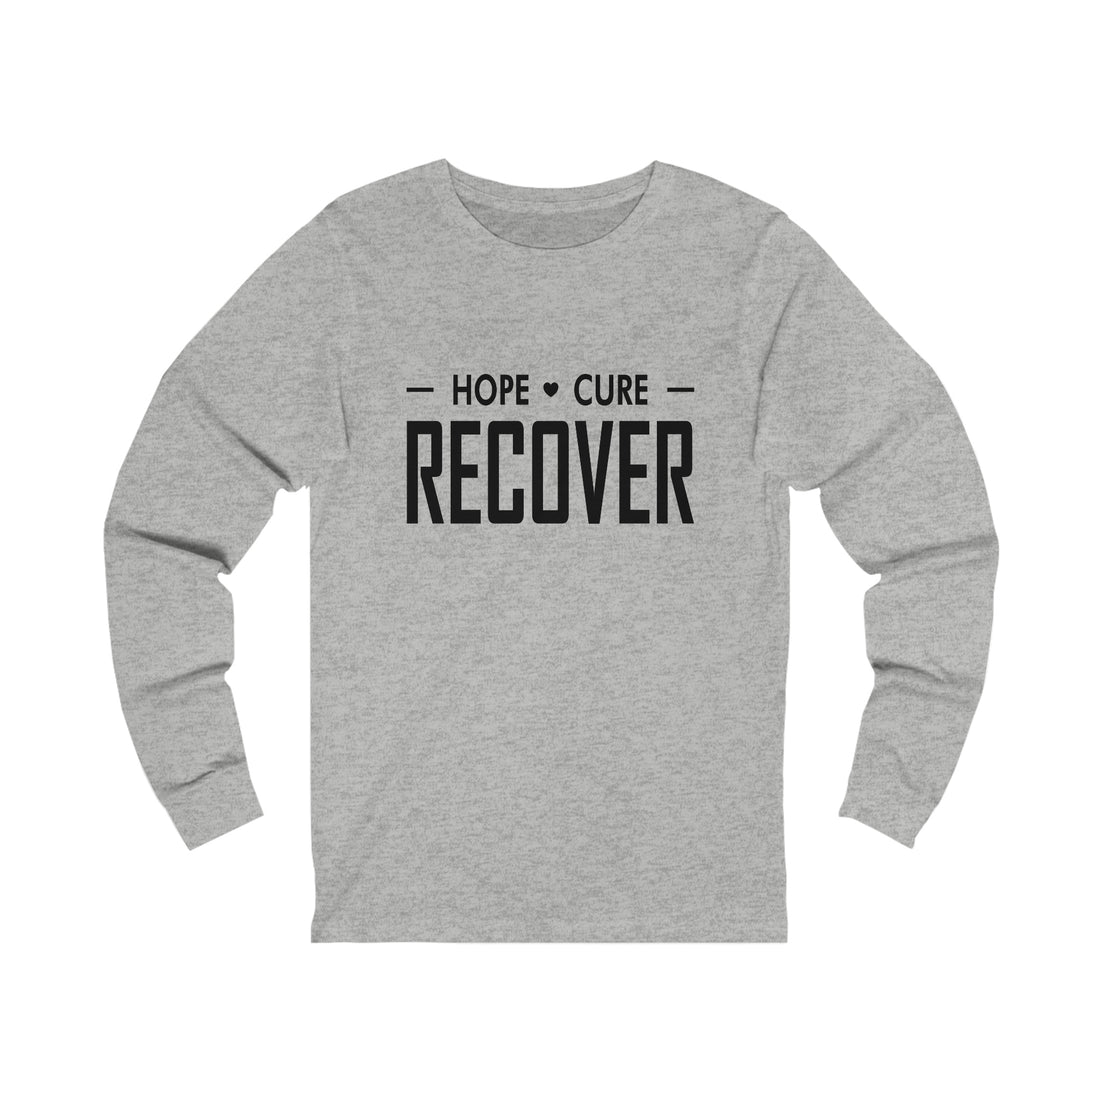 Hope Cure Recover - Unisex Jersey Long Sleeve Tee